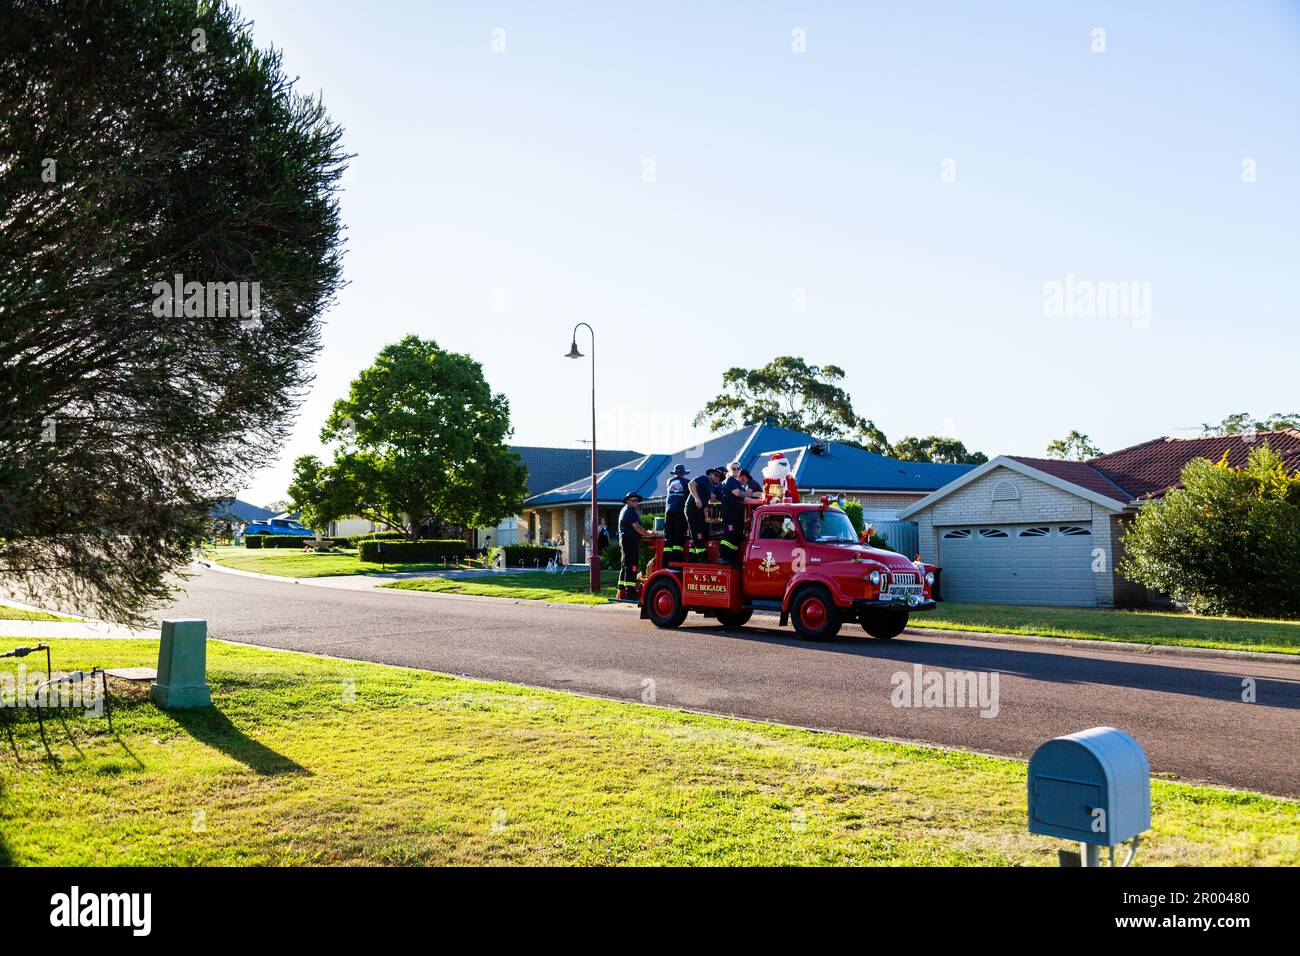 Christmas time lolly run fire truck escorting Santa Claus around the town of Singleton to give out lollies Stock Photo